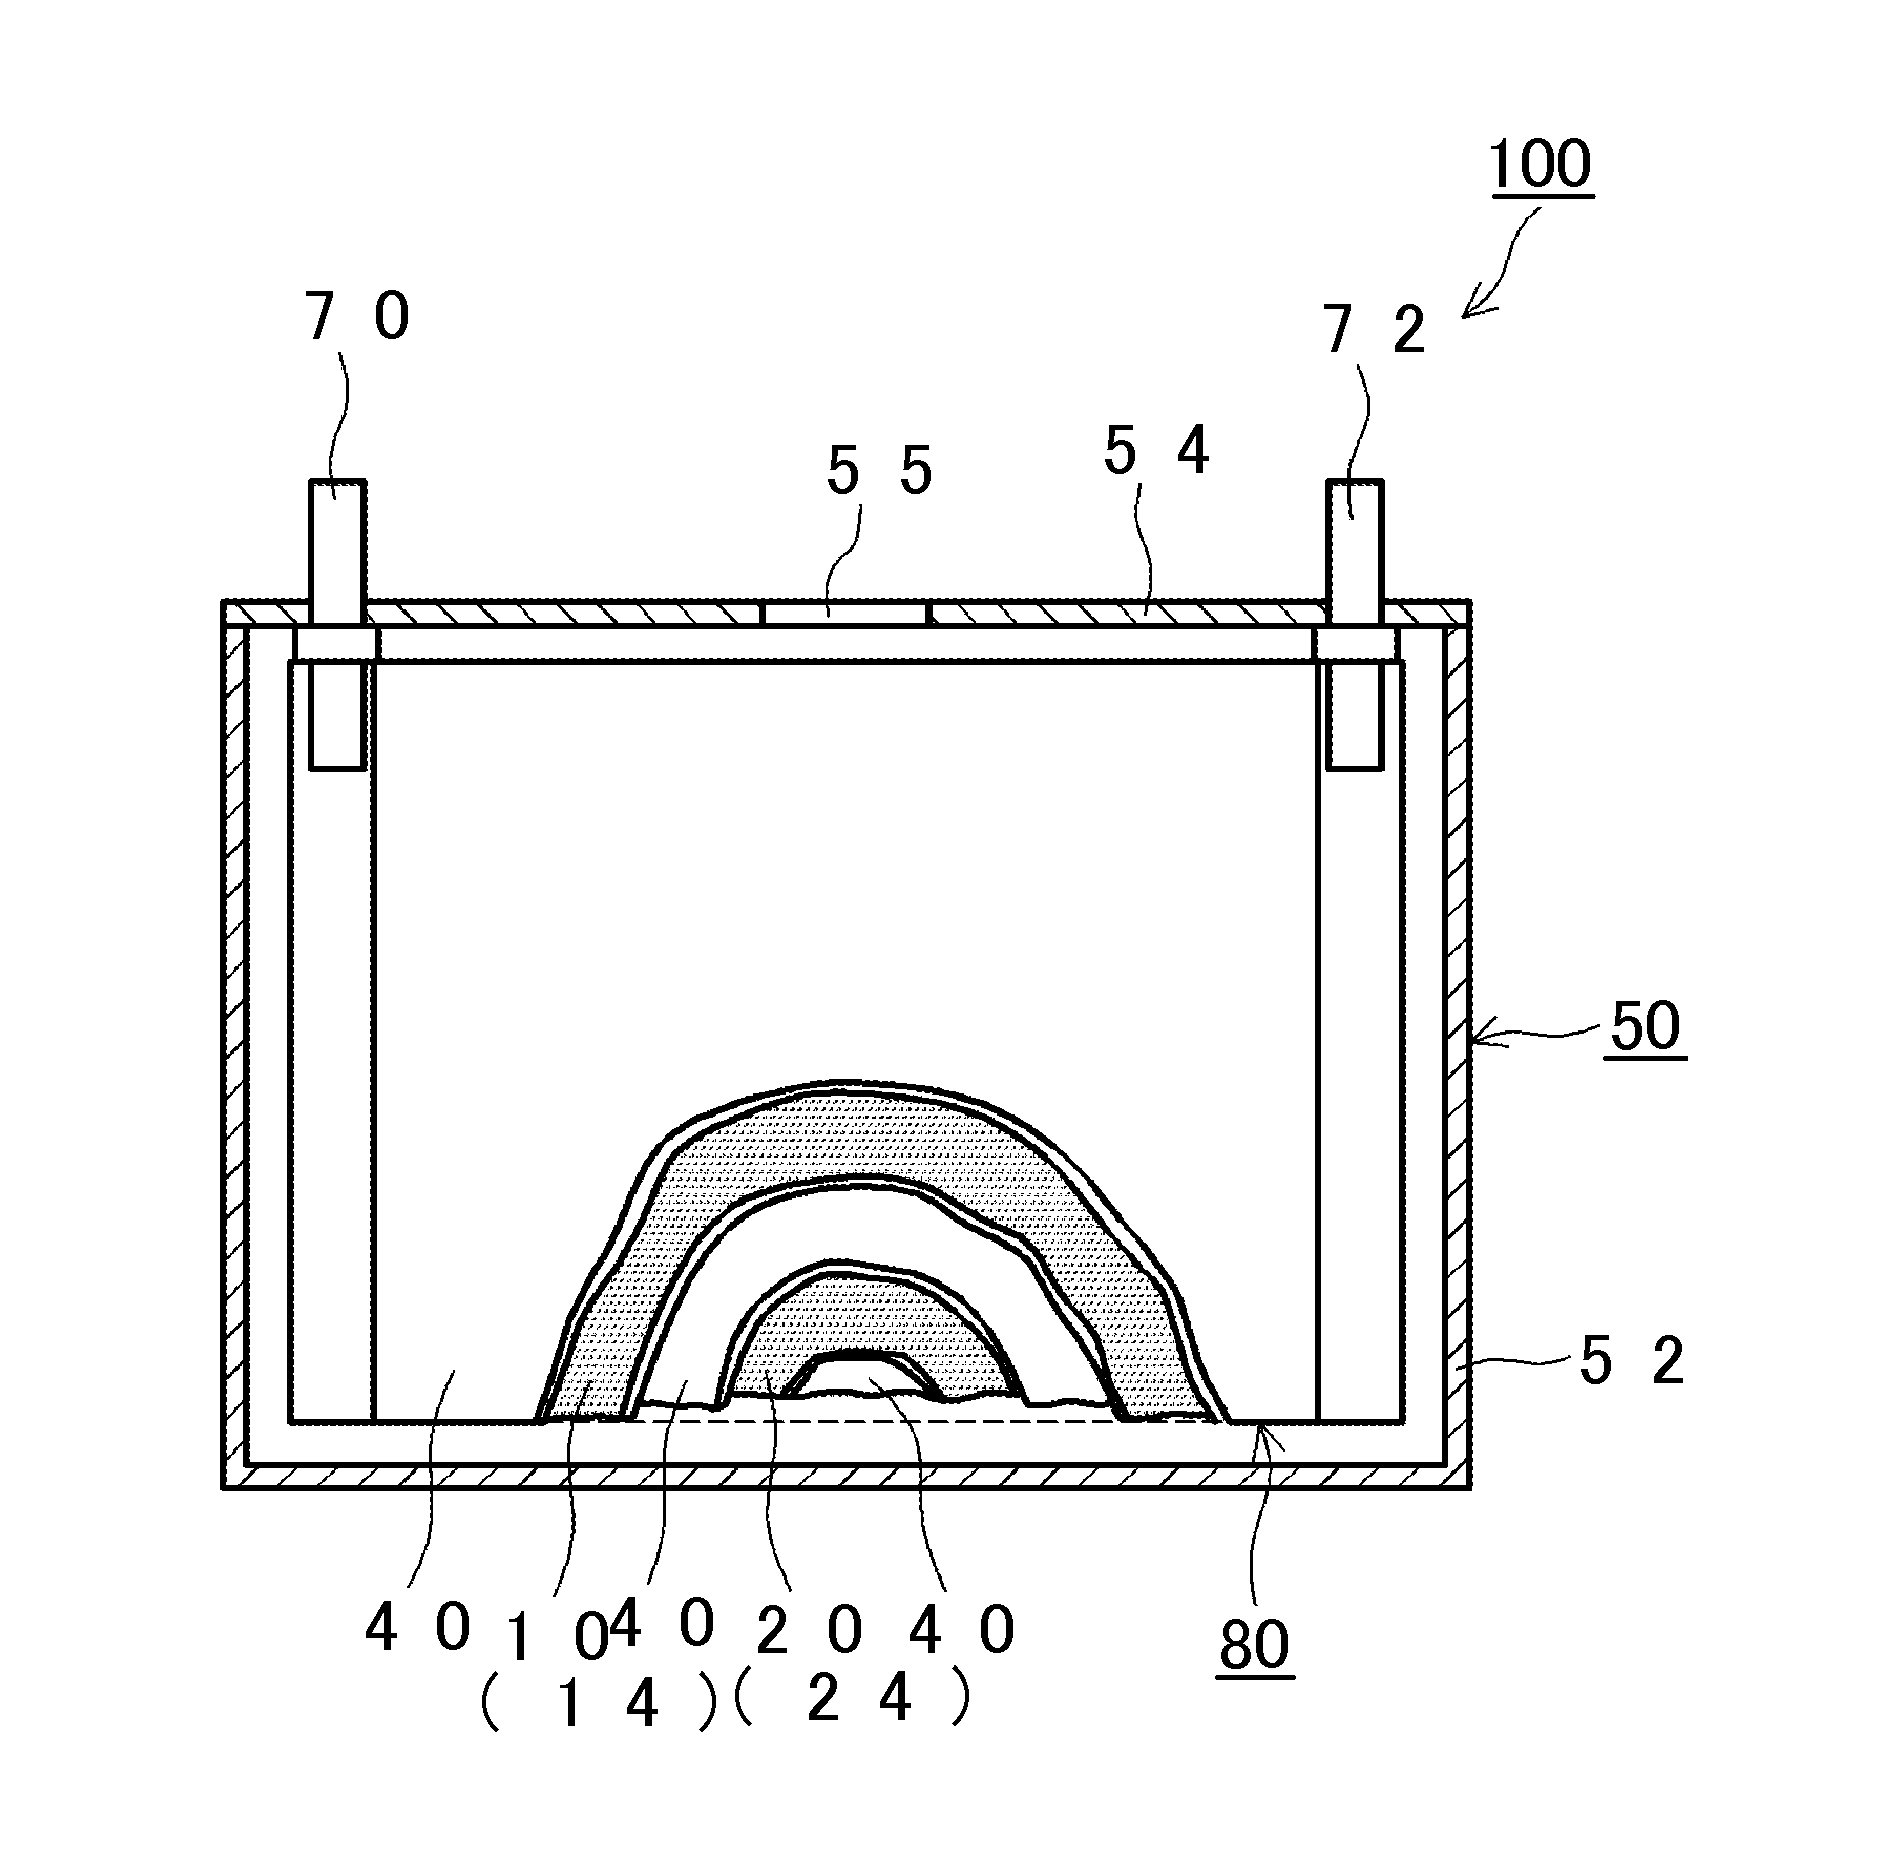 Positive active material for lithium-ion secondary battery,
positive electrode for lithium-ion secondary battery, and
lithium-ion secondary battery